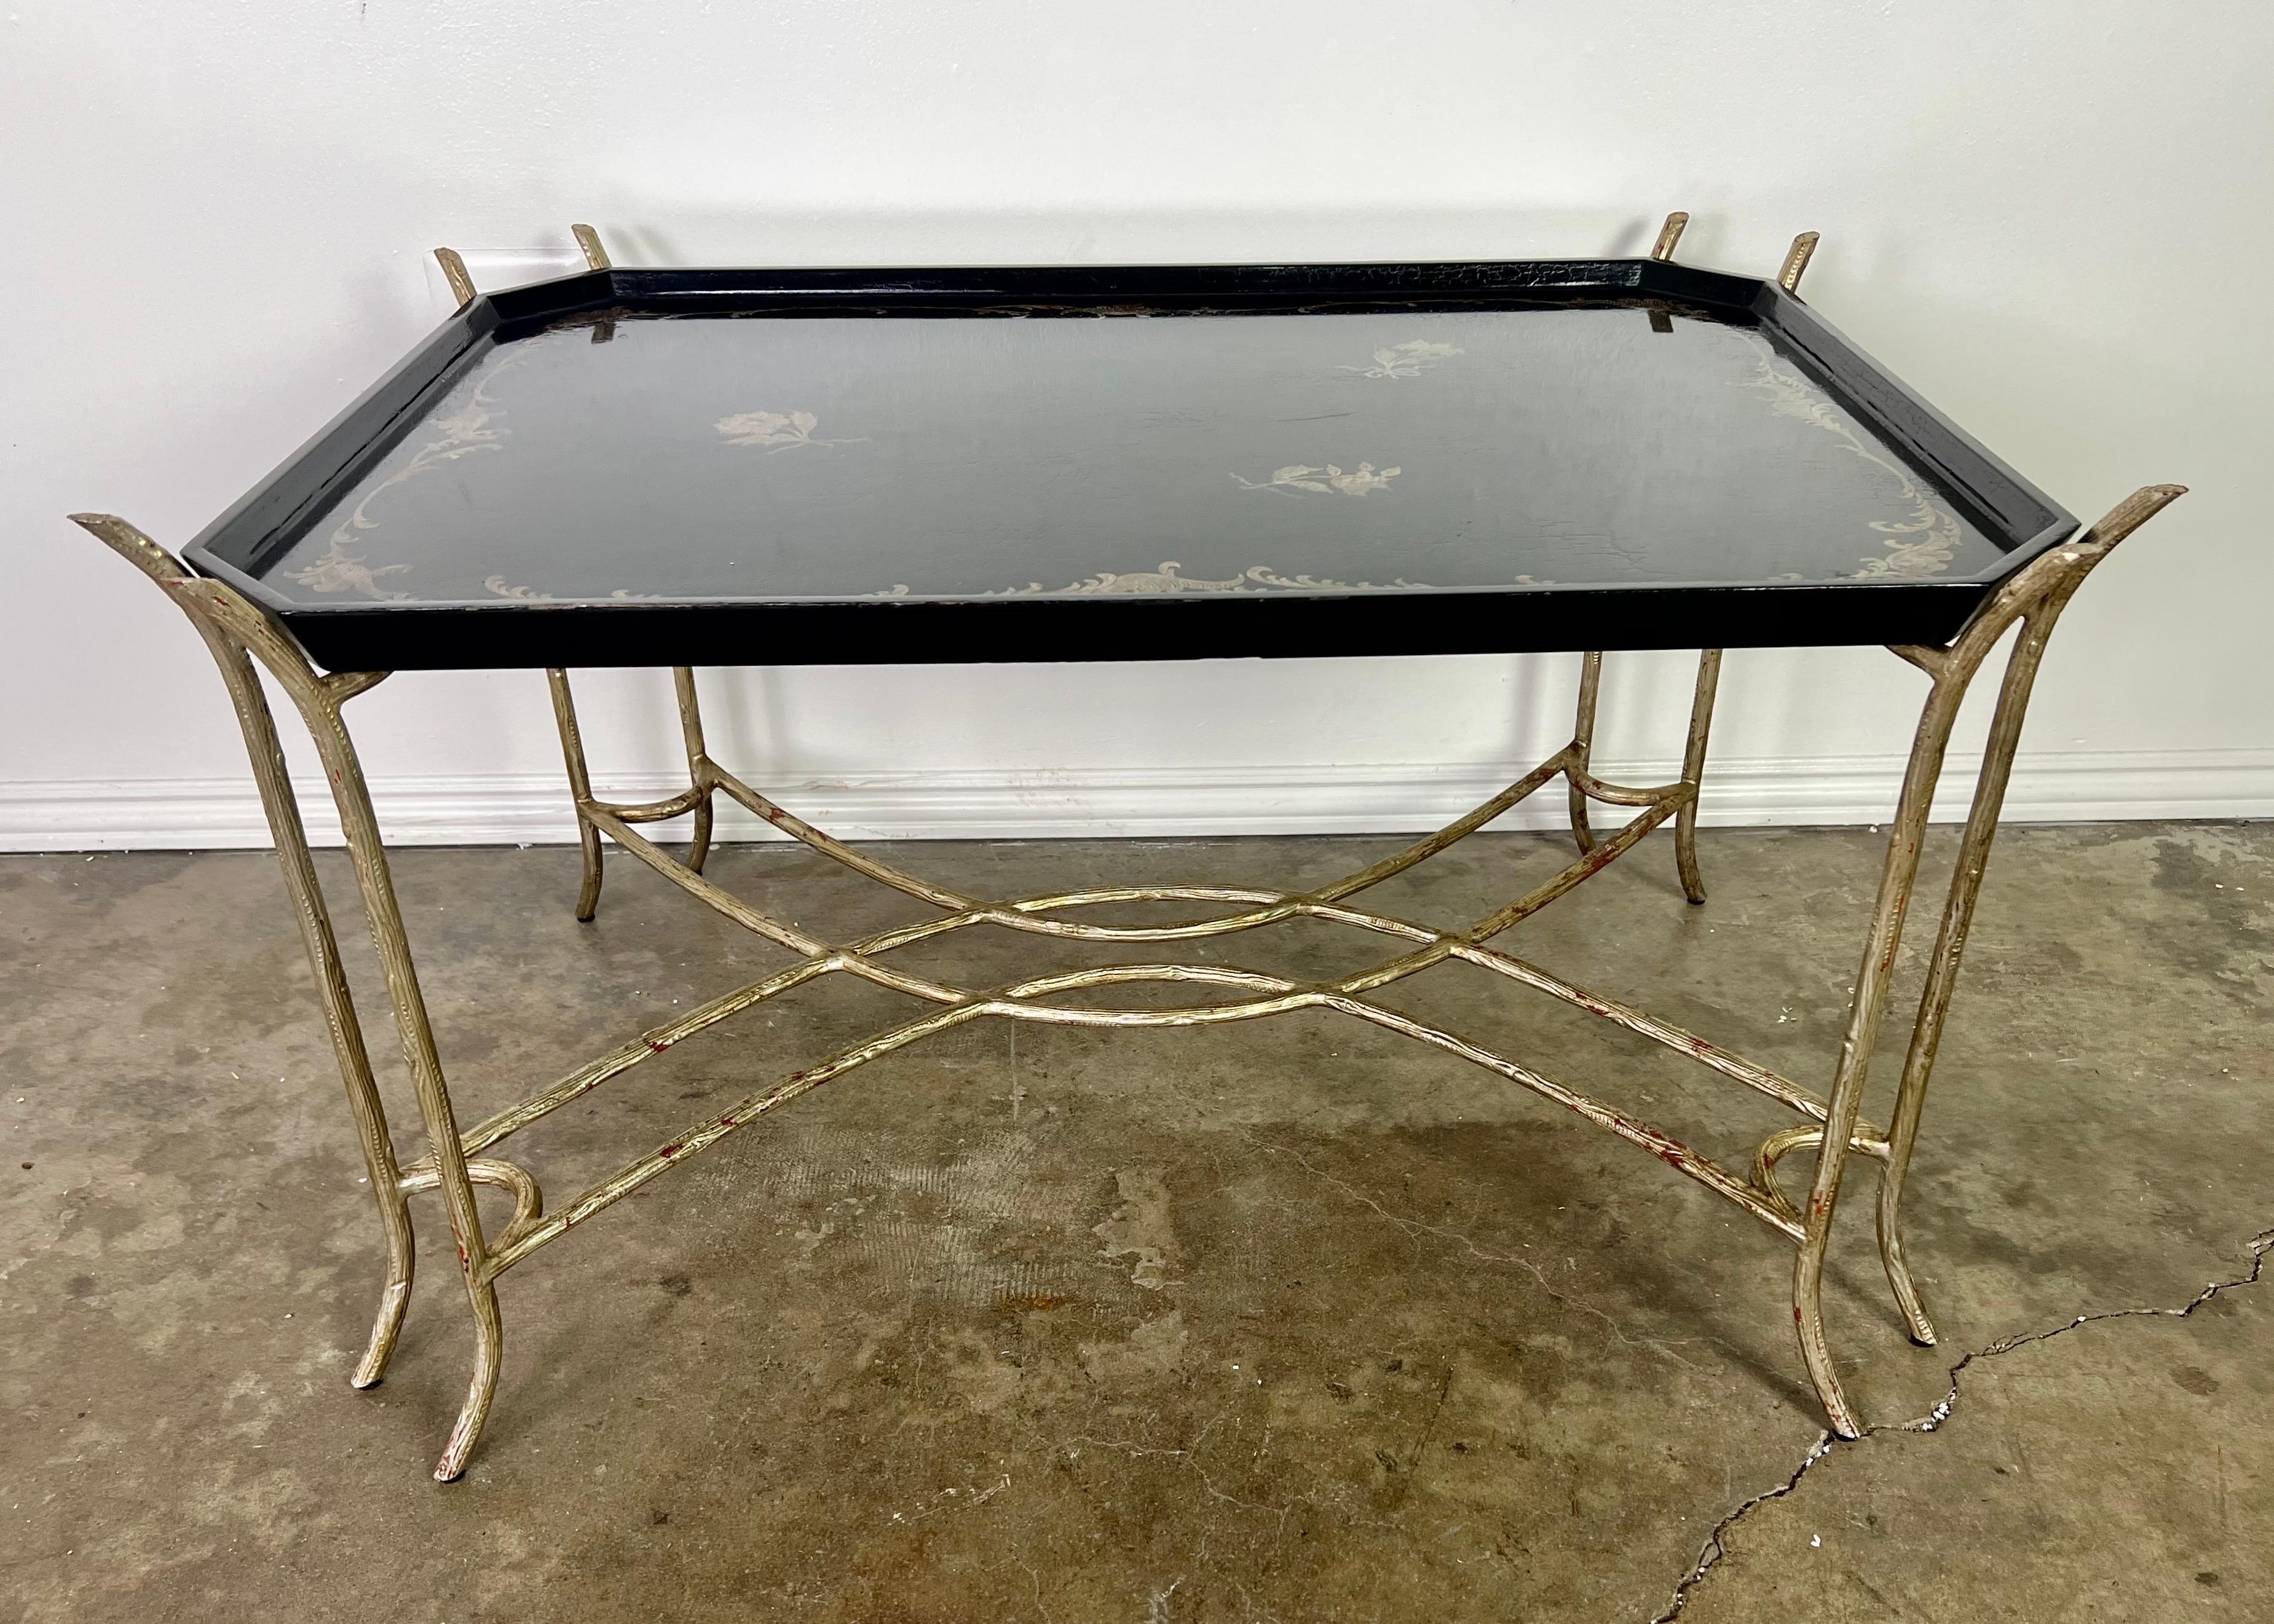 Chinoiserie Lacquered Tea Table on Metal Base by Ebanista In Good Condition For Sale In Los Angeles, CA